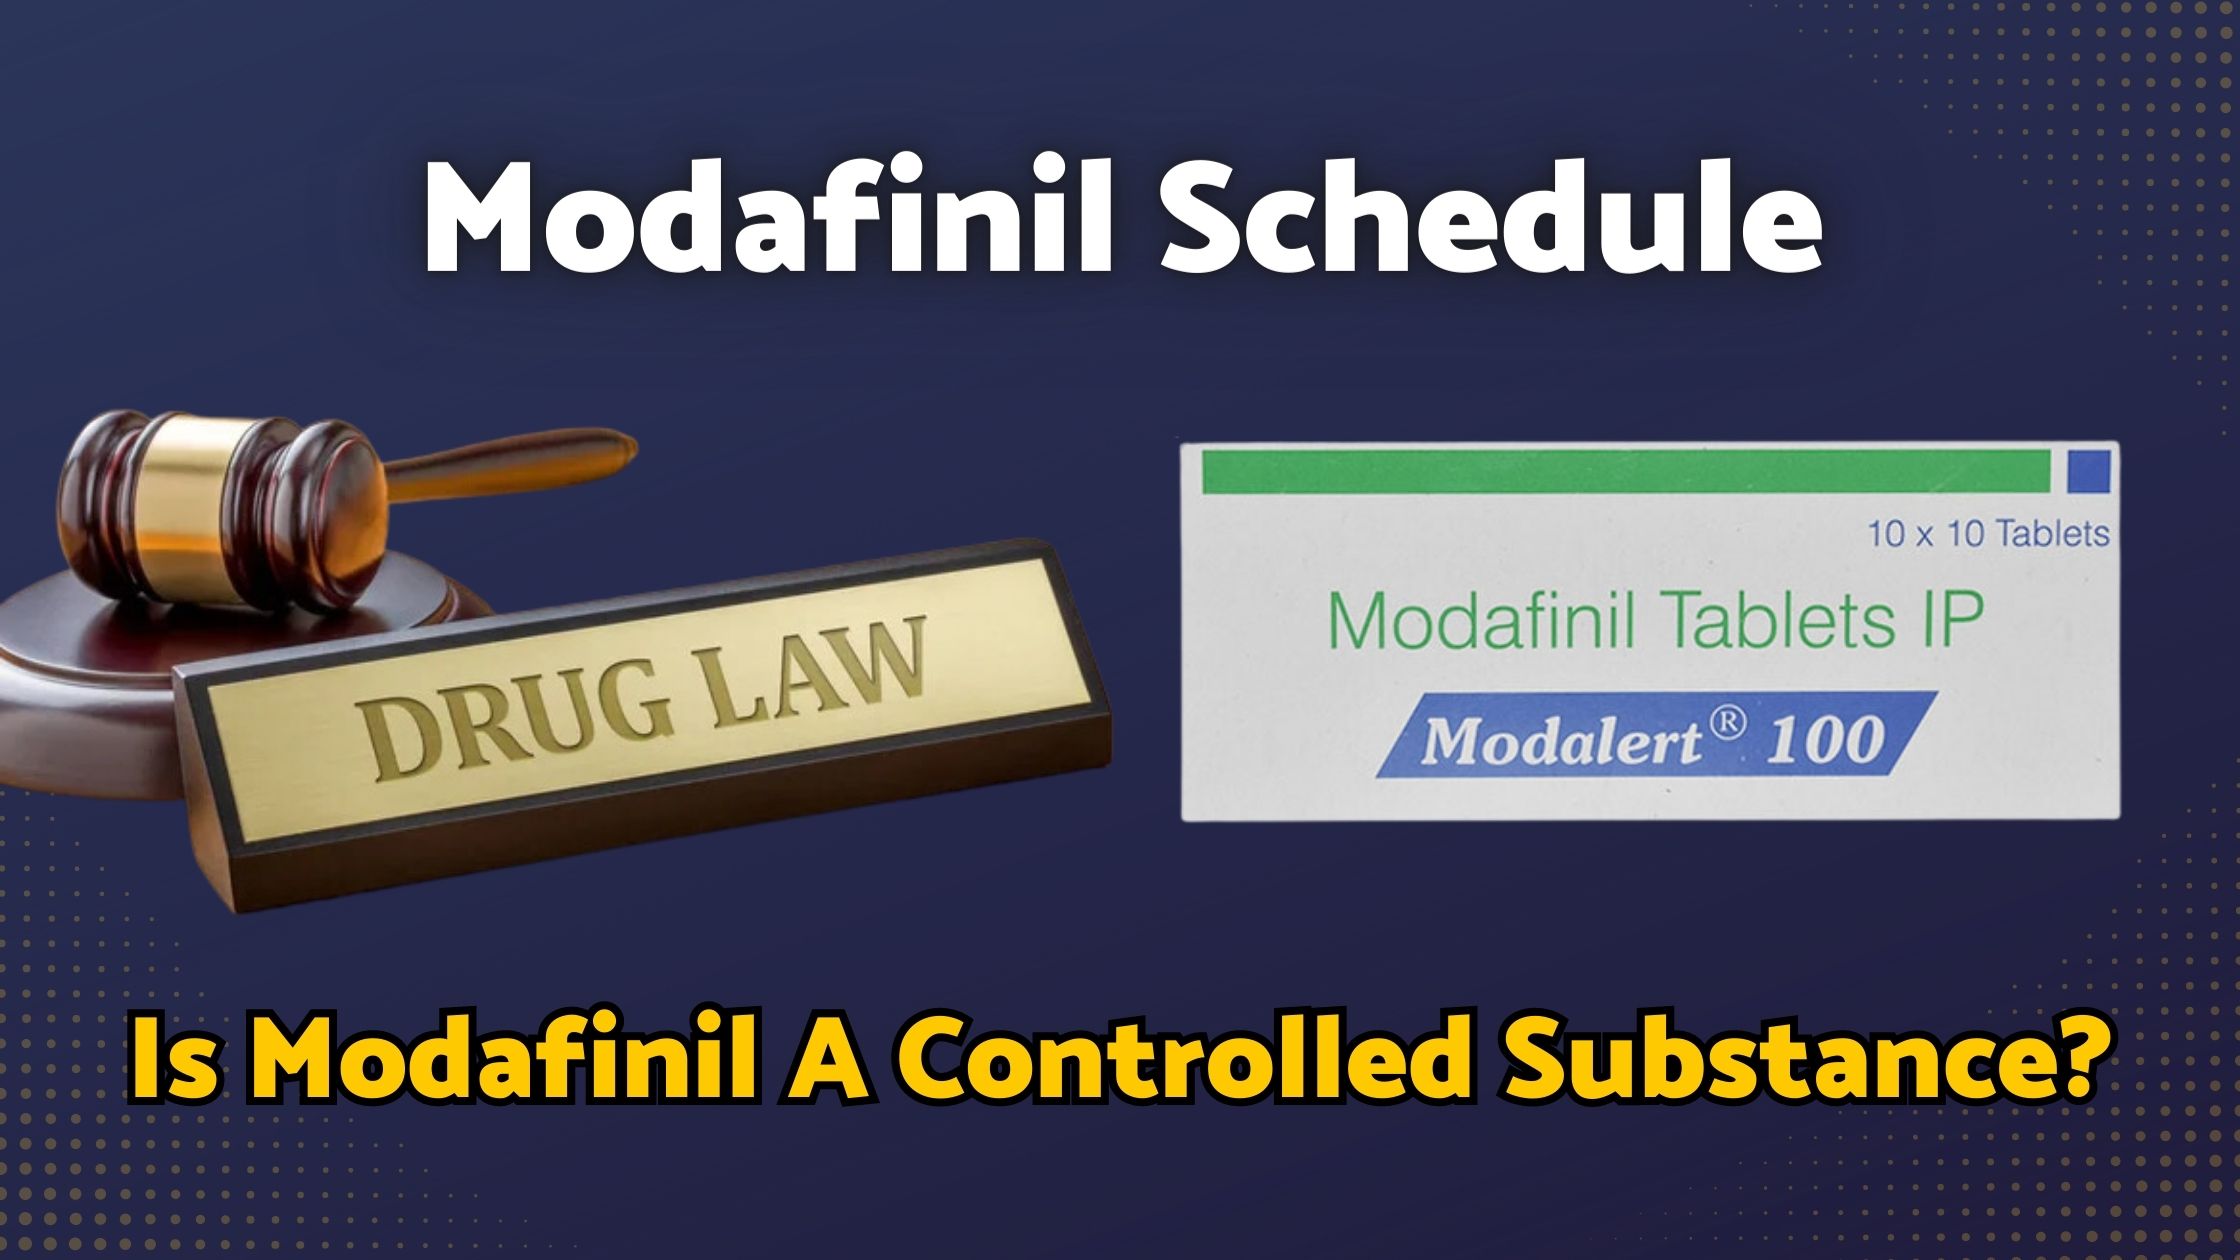 Modafinil Schedule: Is Modafinil A Controlled Substance?